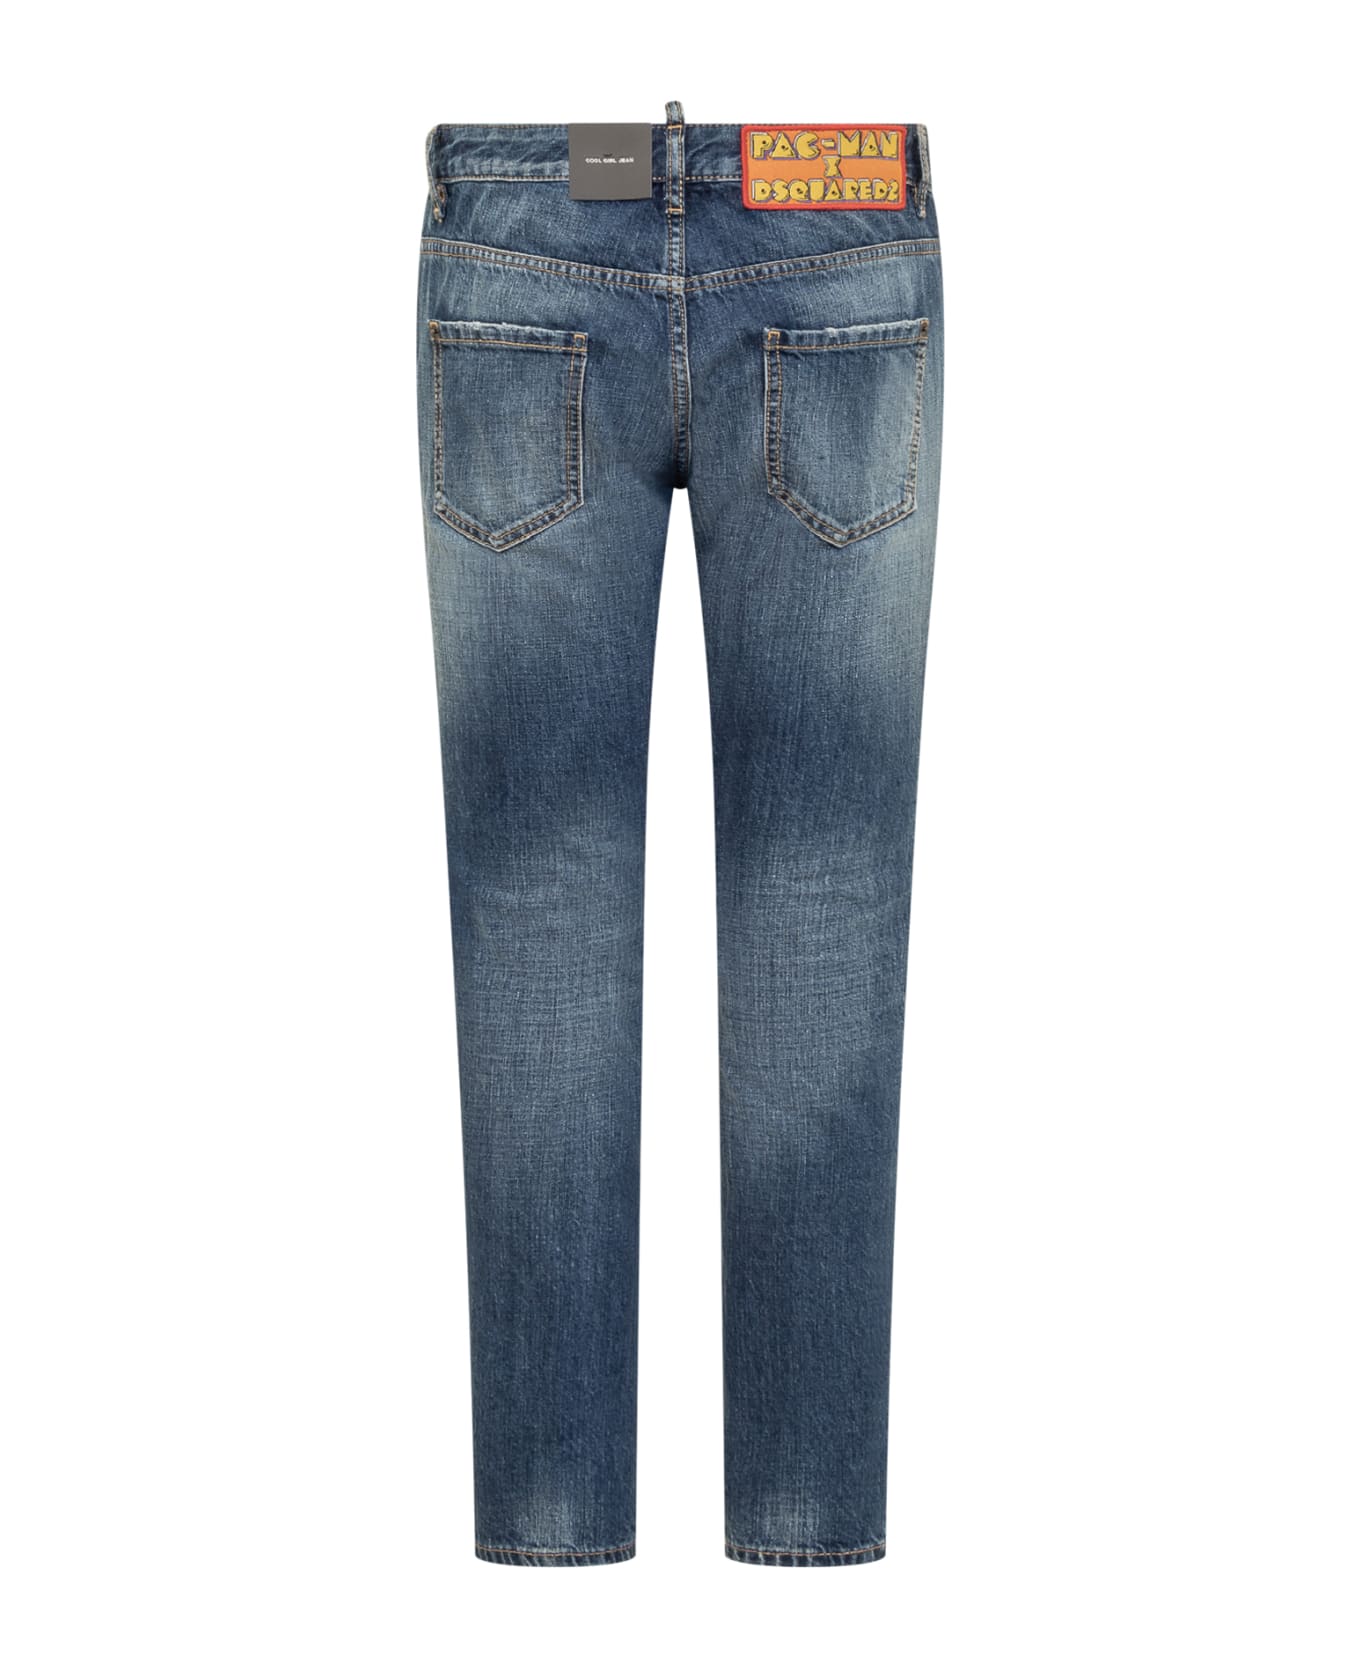 Dsquared2 Pac-man X Dsquared2 Jeans - NAVY BLUE